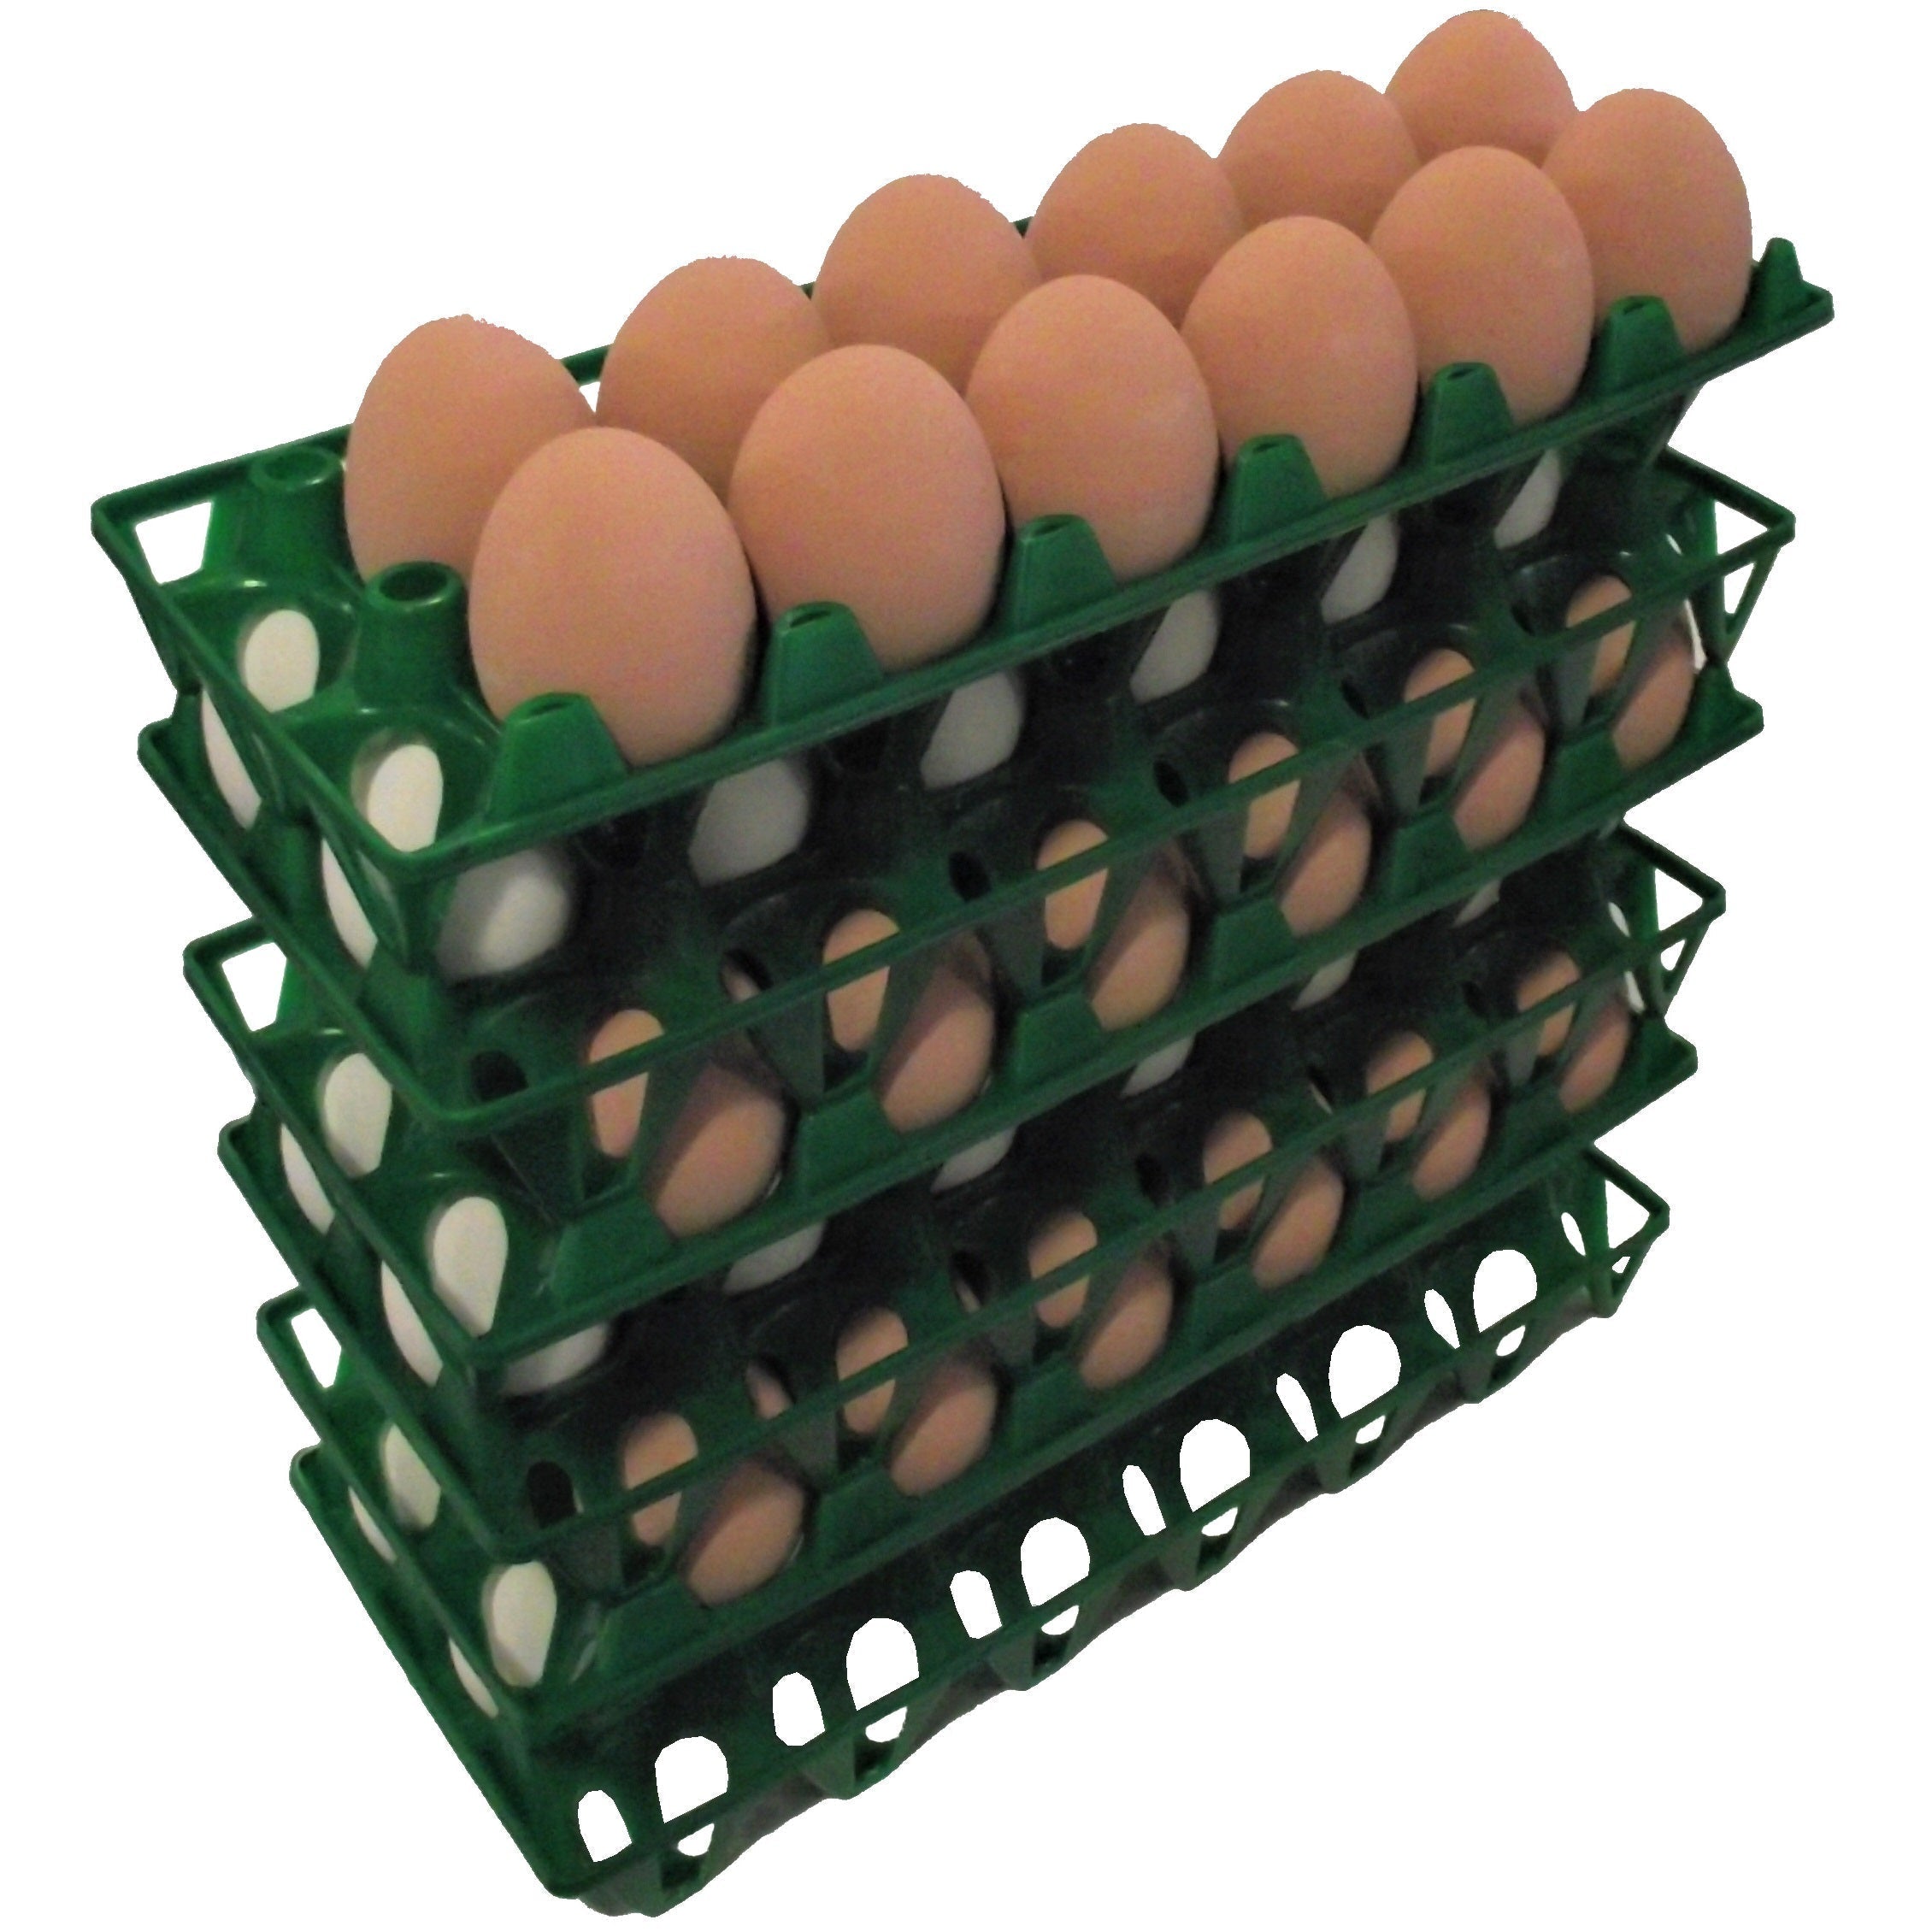 96 Pack of Rite Farm Products 12 Chicken Egg Poly Trays